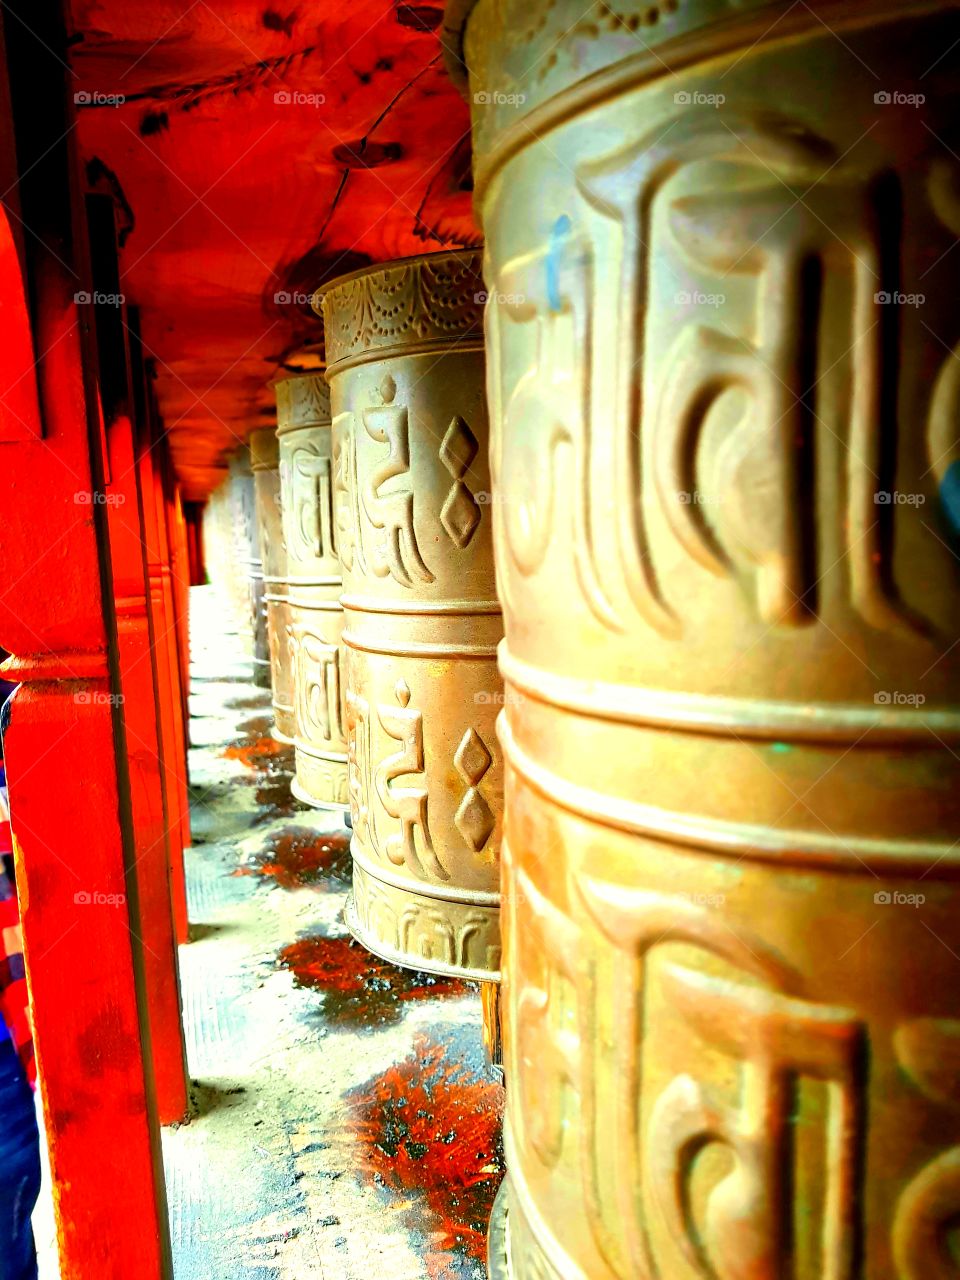 Spin multiple prayer wheels and accumulate infinite merits. spread happiness.